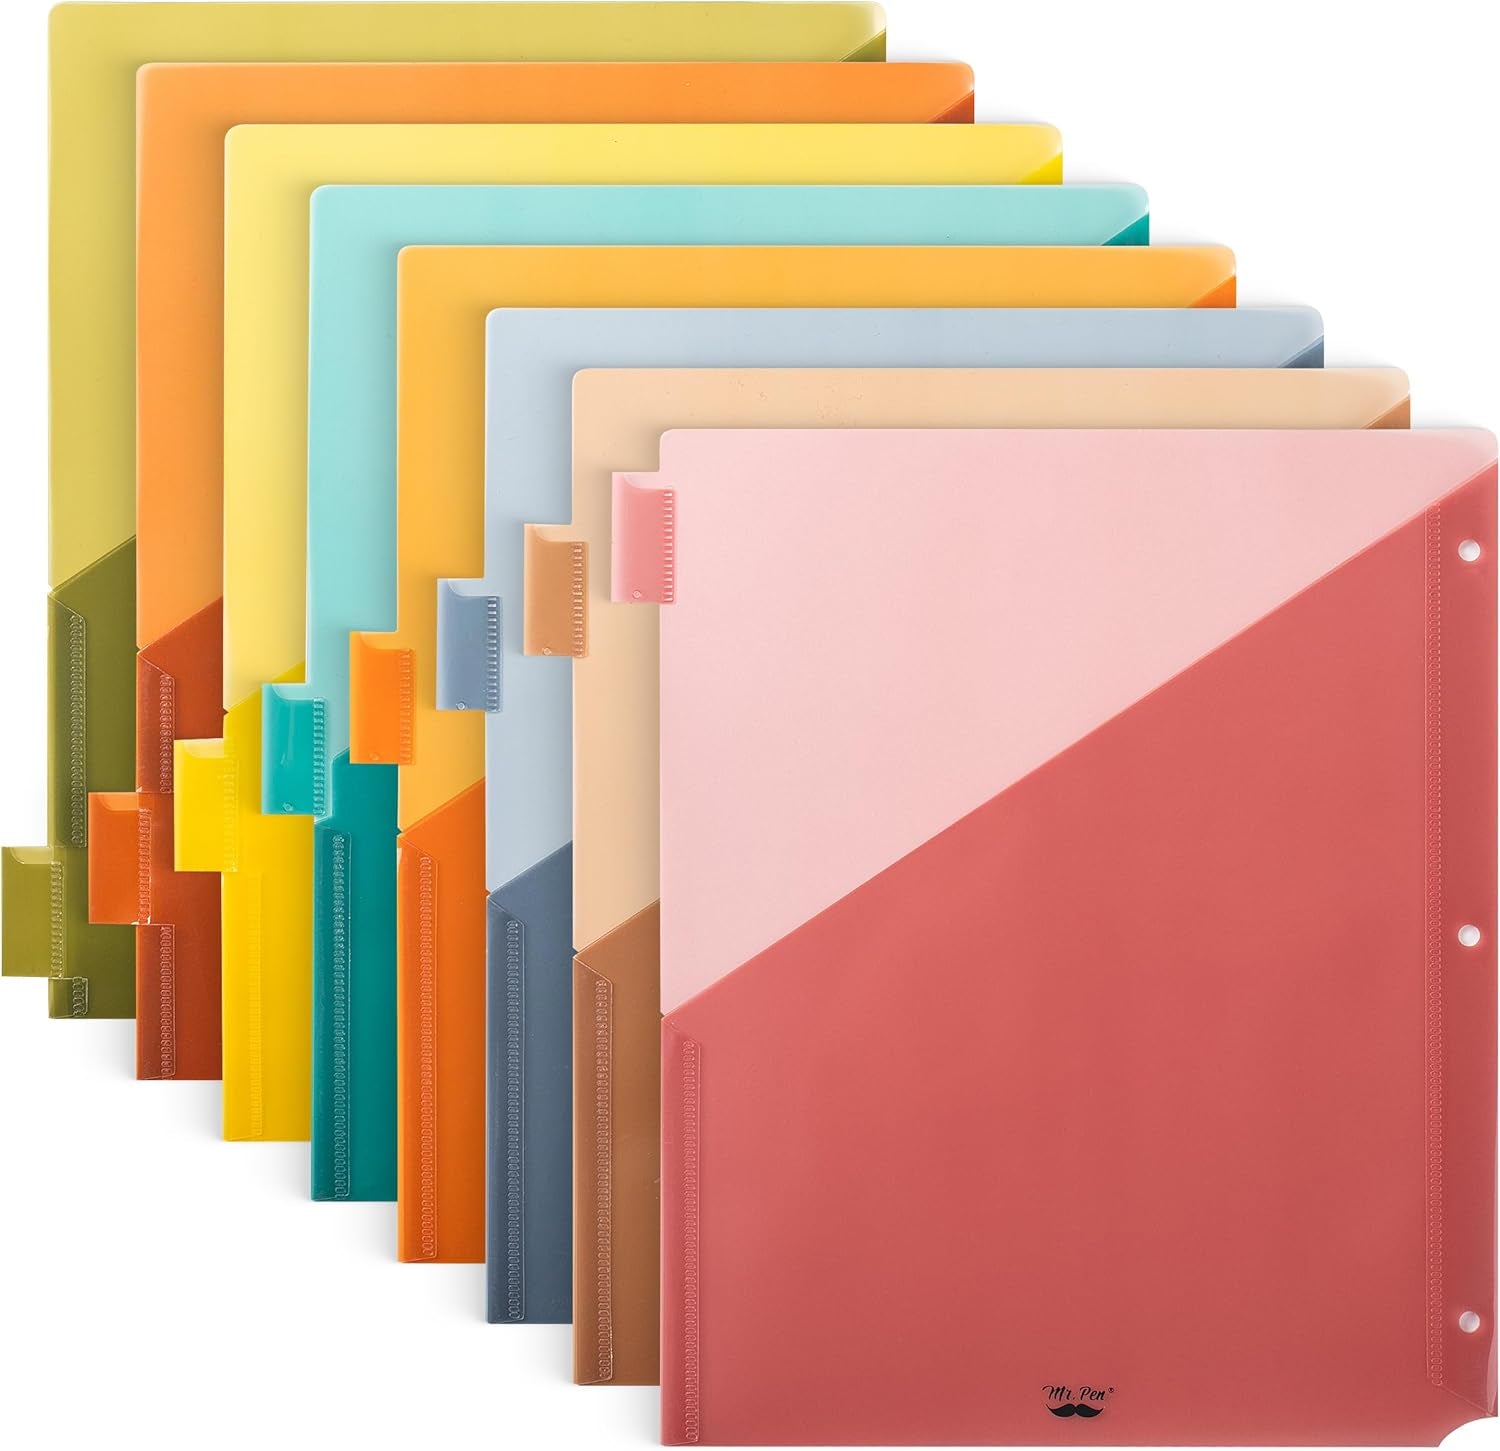 - Binder Dividers with Pockets and Tabs, 8 Pack, Pocket Dividers for 3 Ring Binder with Tabs, Binder Dividers with Pockets, Dividers with Pockets, Binder Divider, Plastic Dividers with Pockets